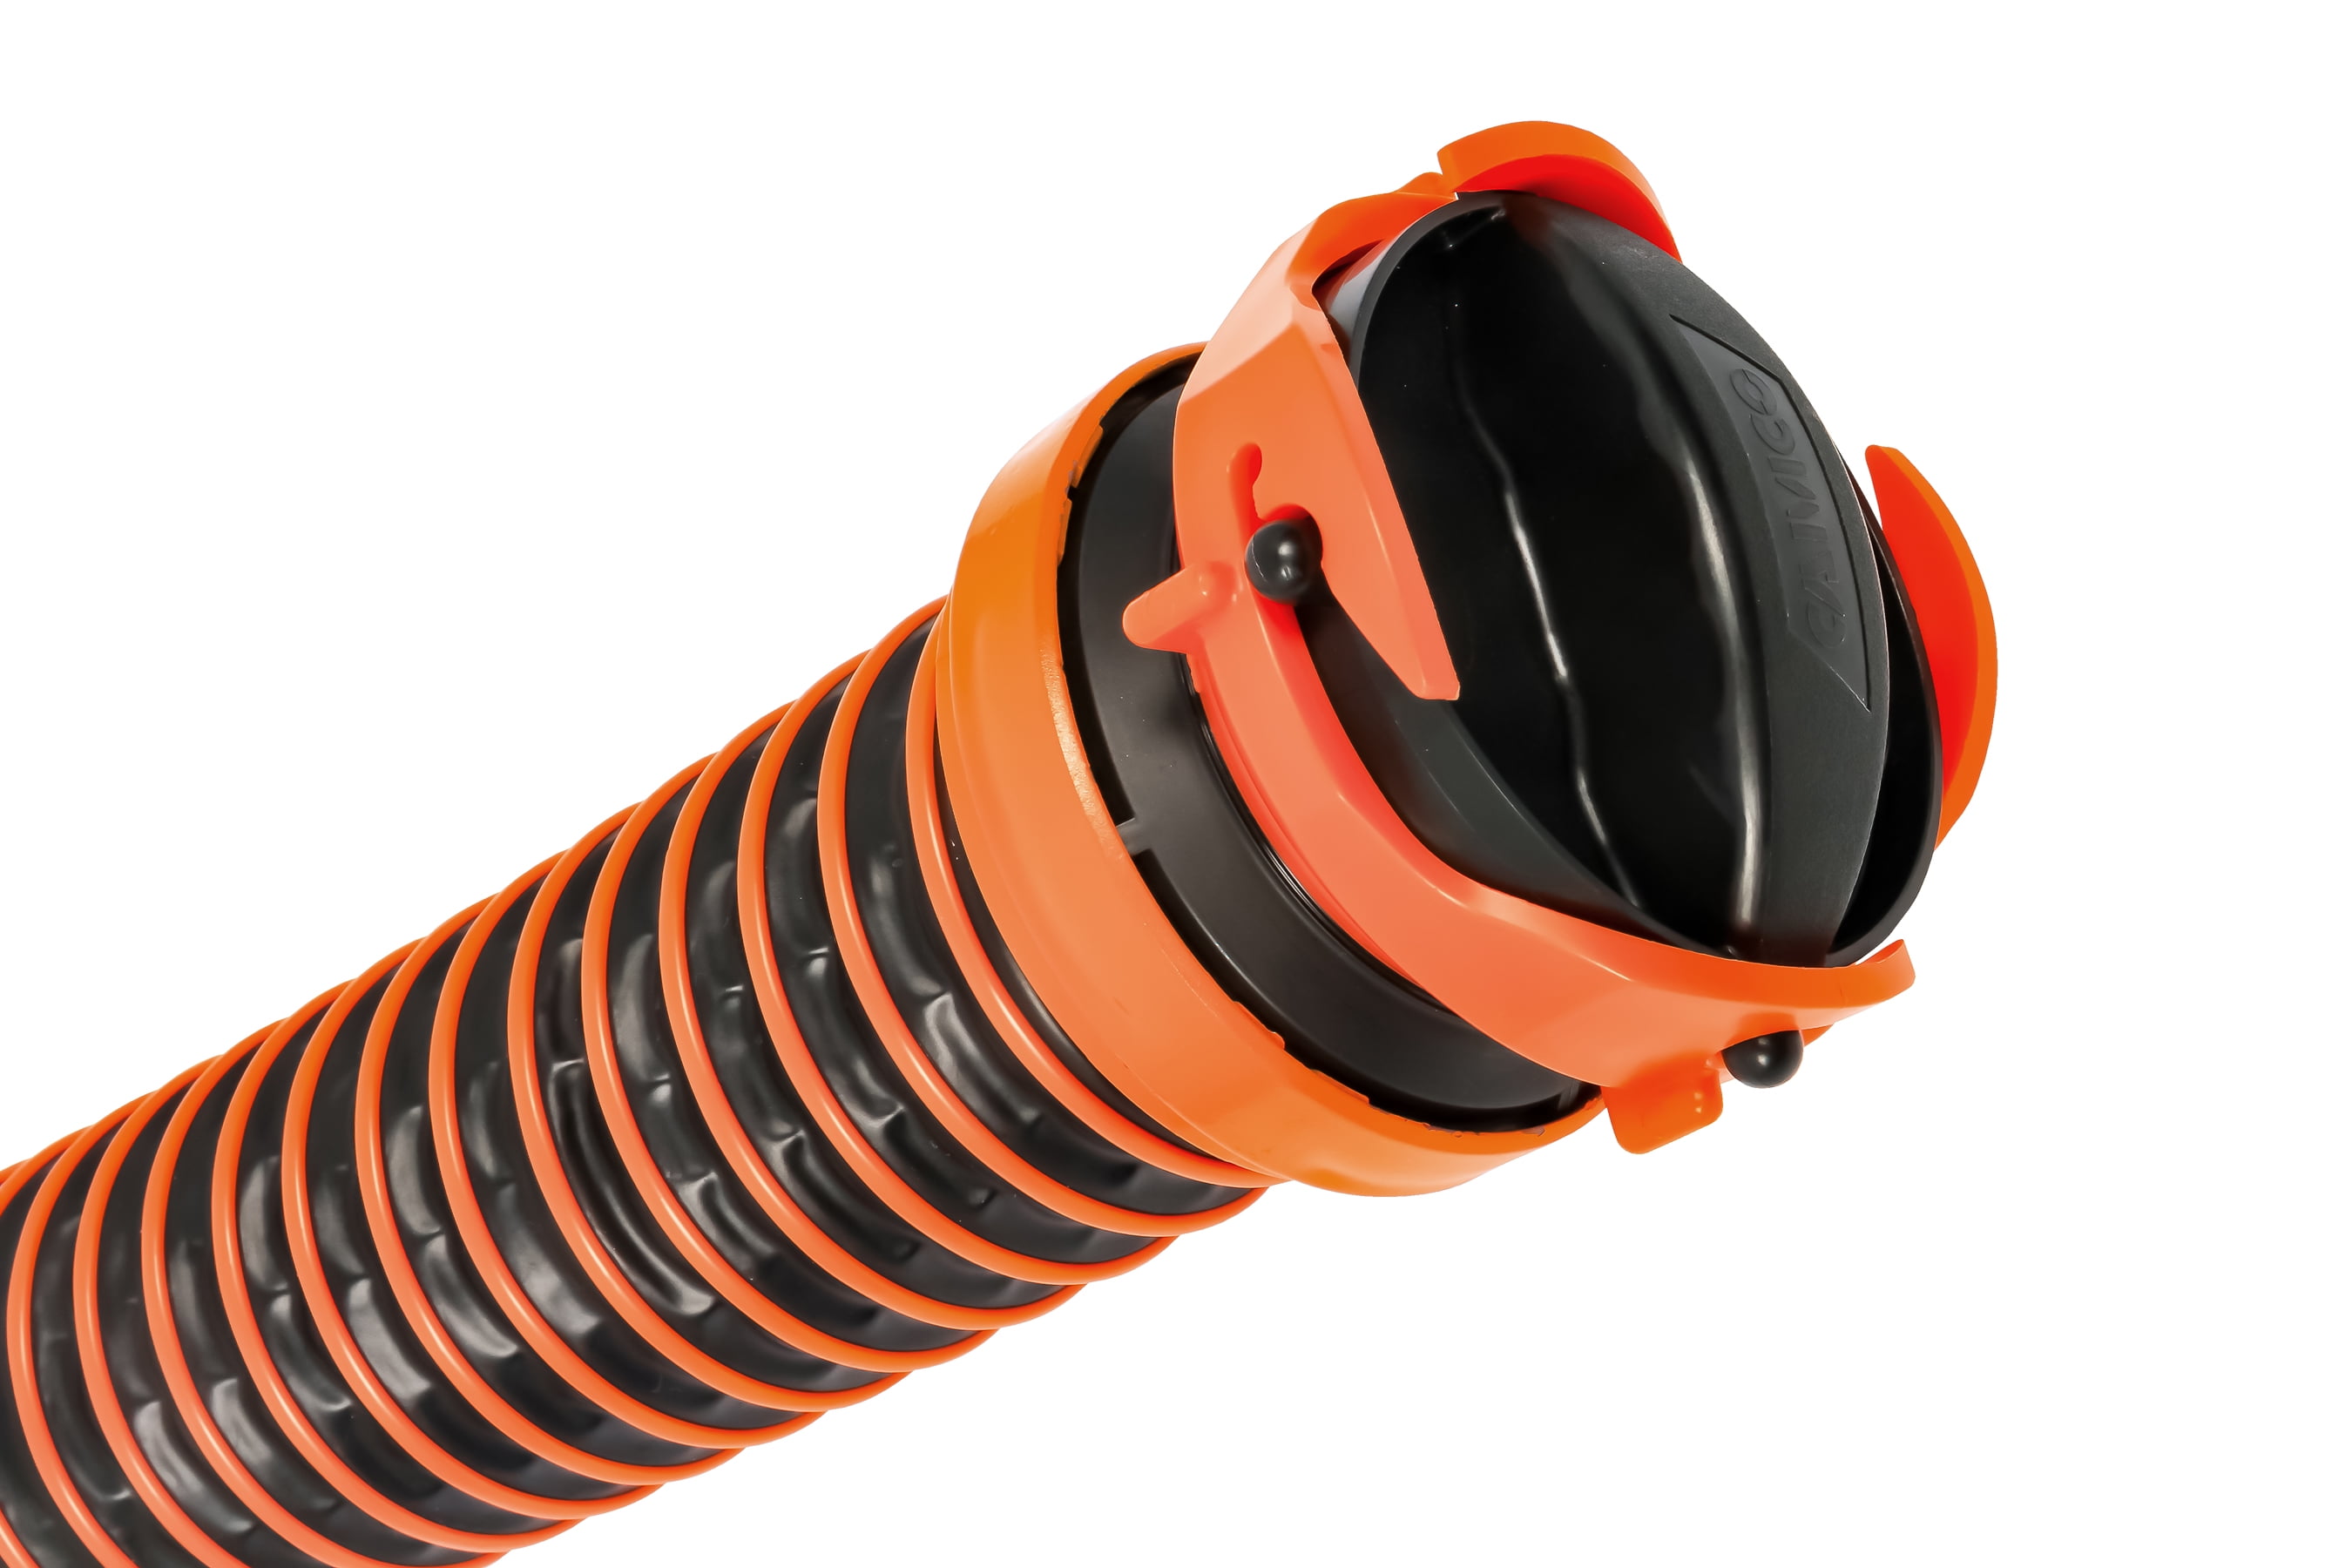 Camco RhinoEXTREME 20ft RV Sewer Hose Kit Swivel Translucent Elbow with 4-in-1 Dump Station Fitting-Crush Resistant-Storage Caps Included 21012